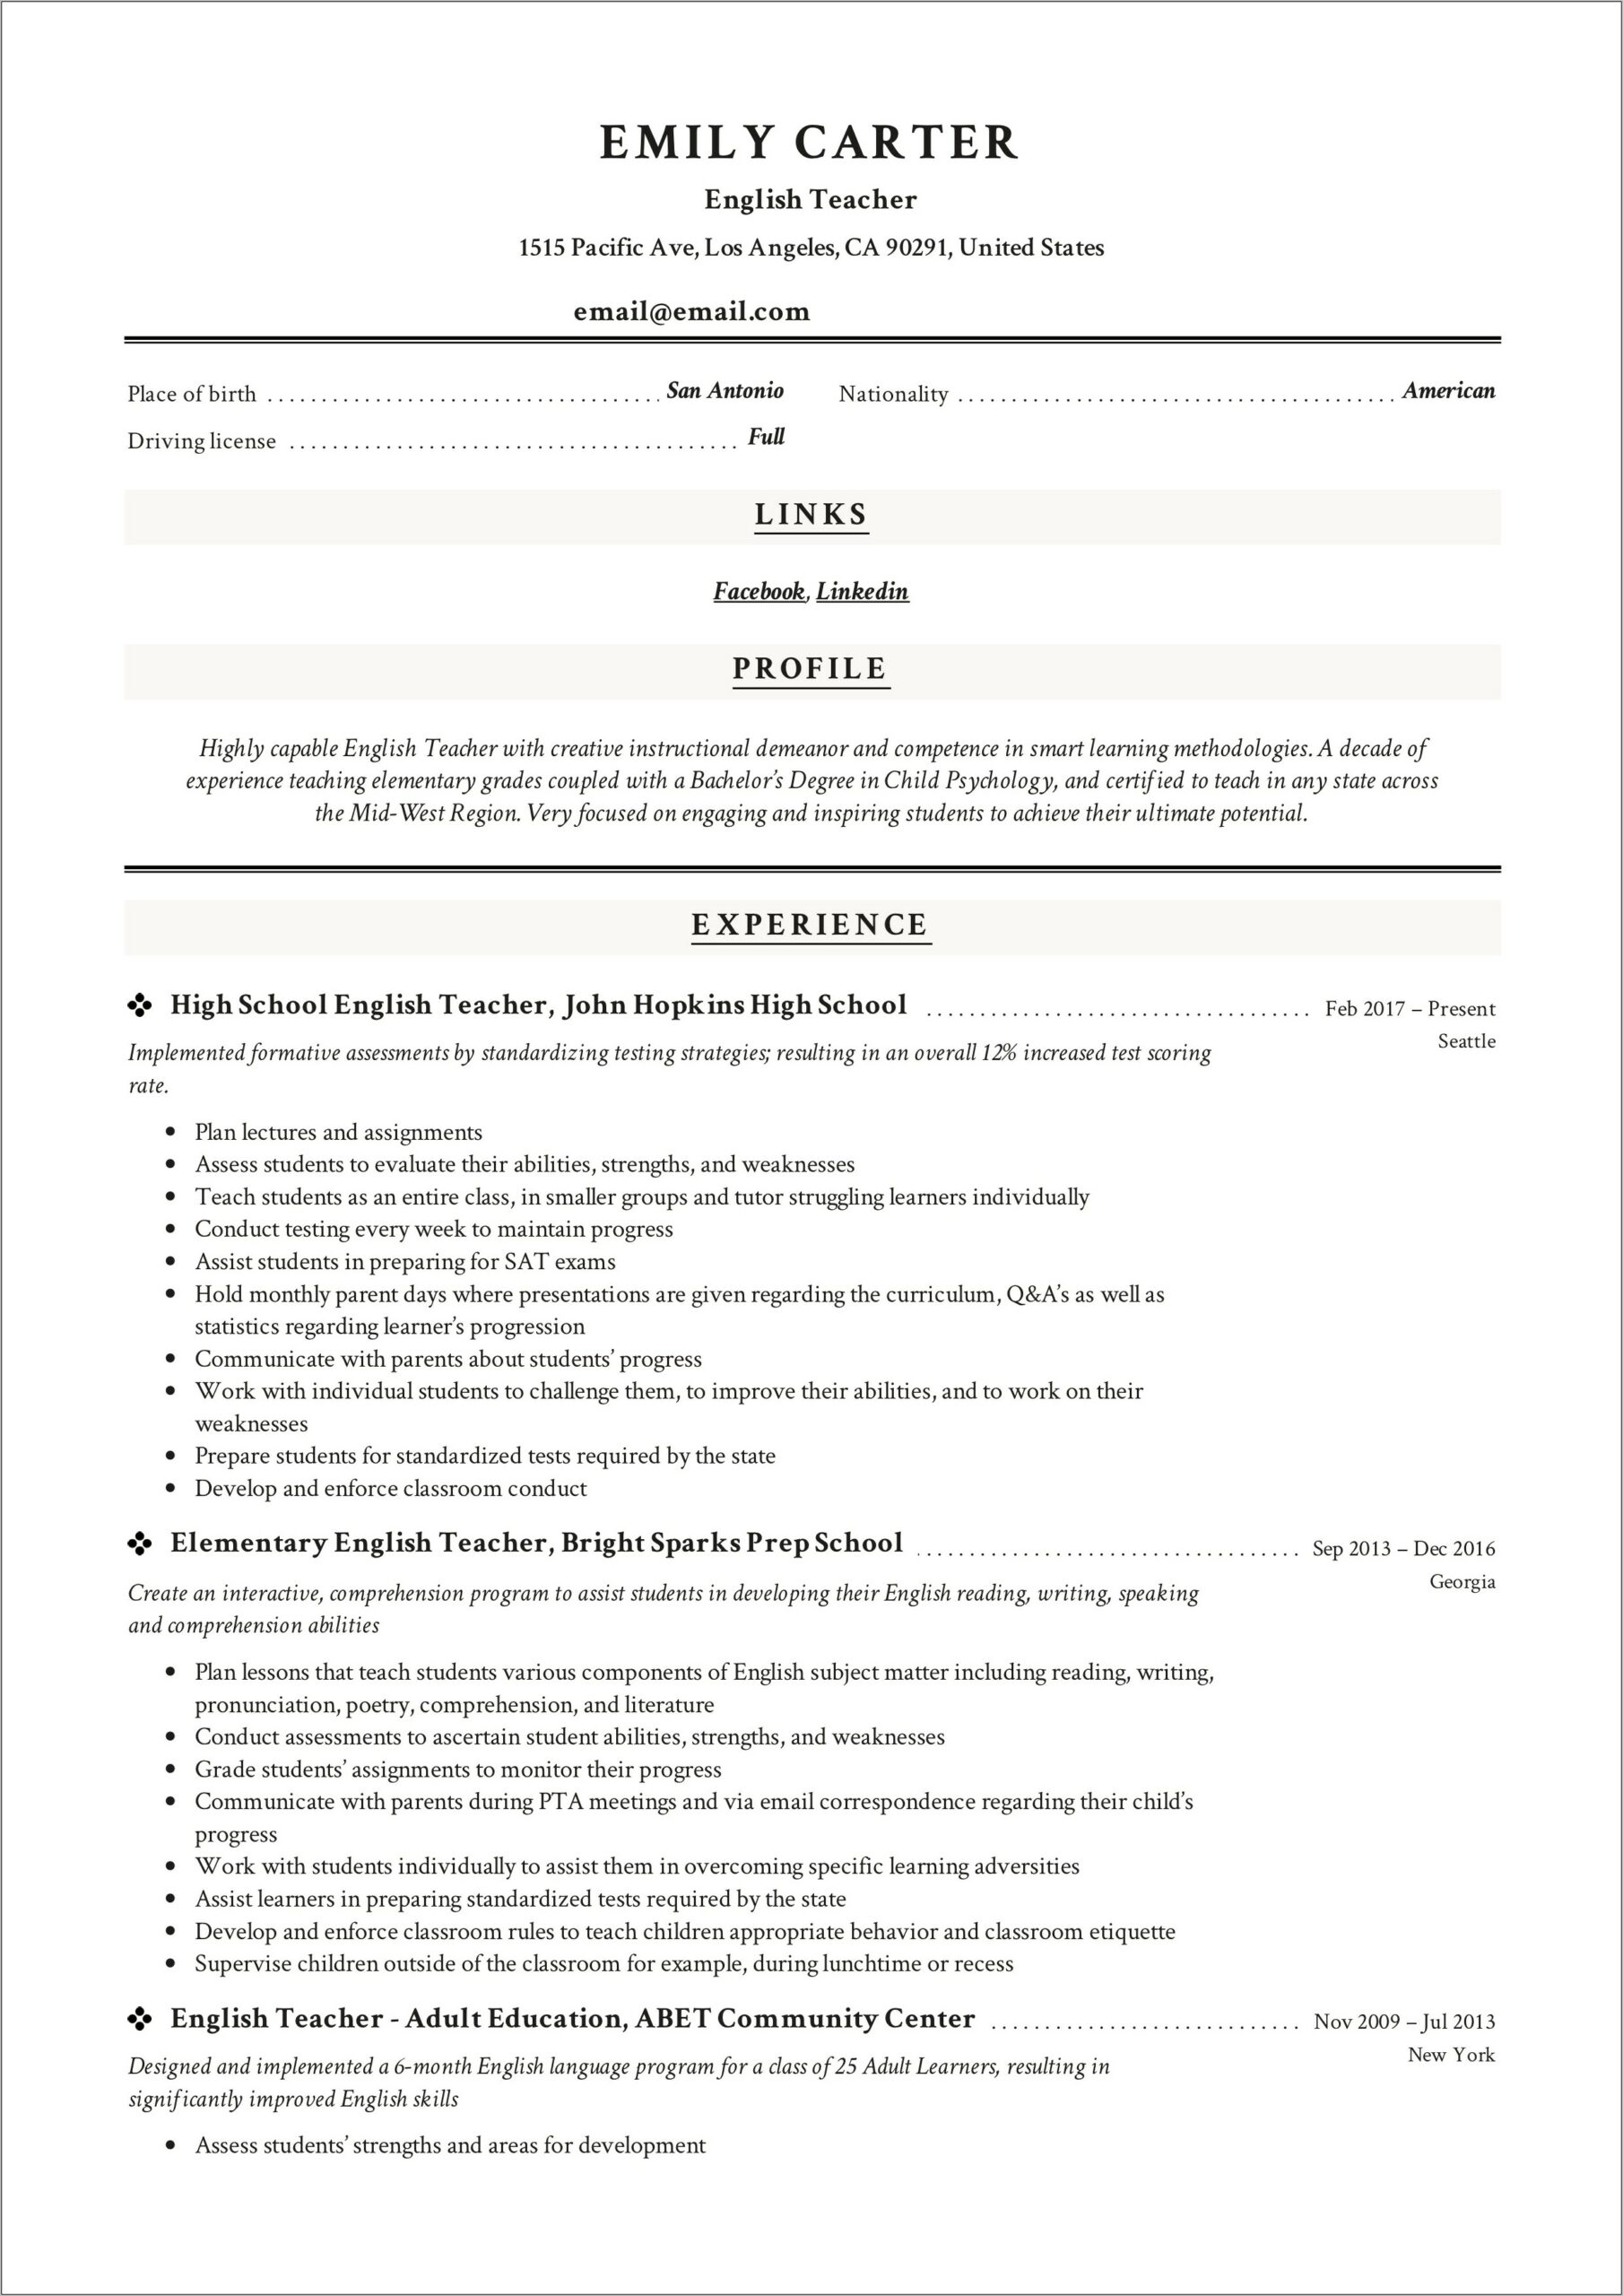 Resume Experience In A Lot Of Area